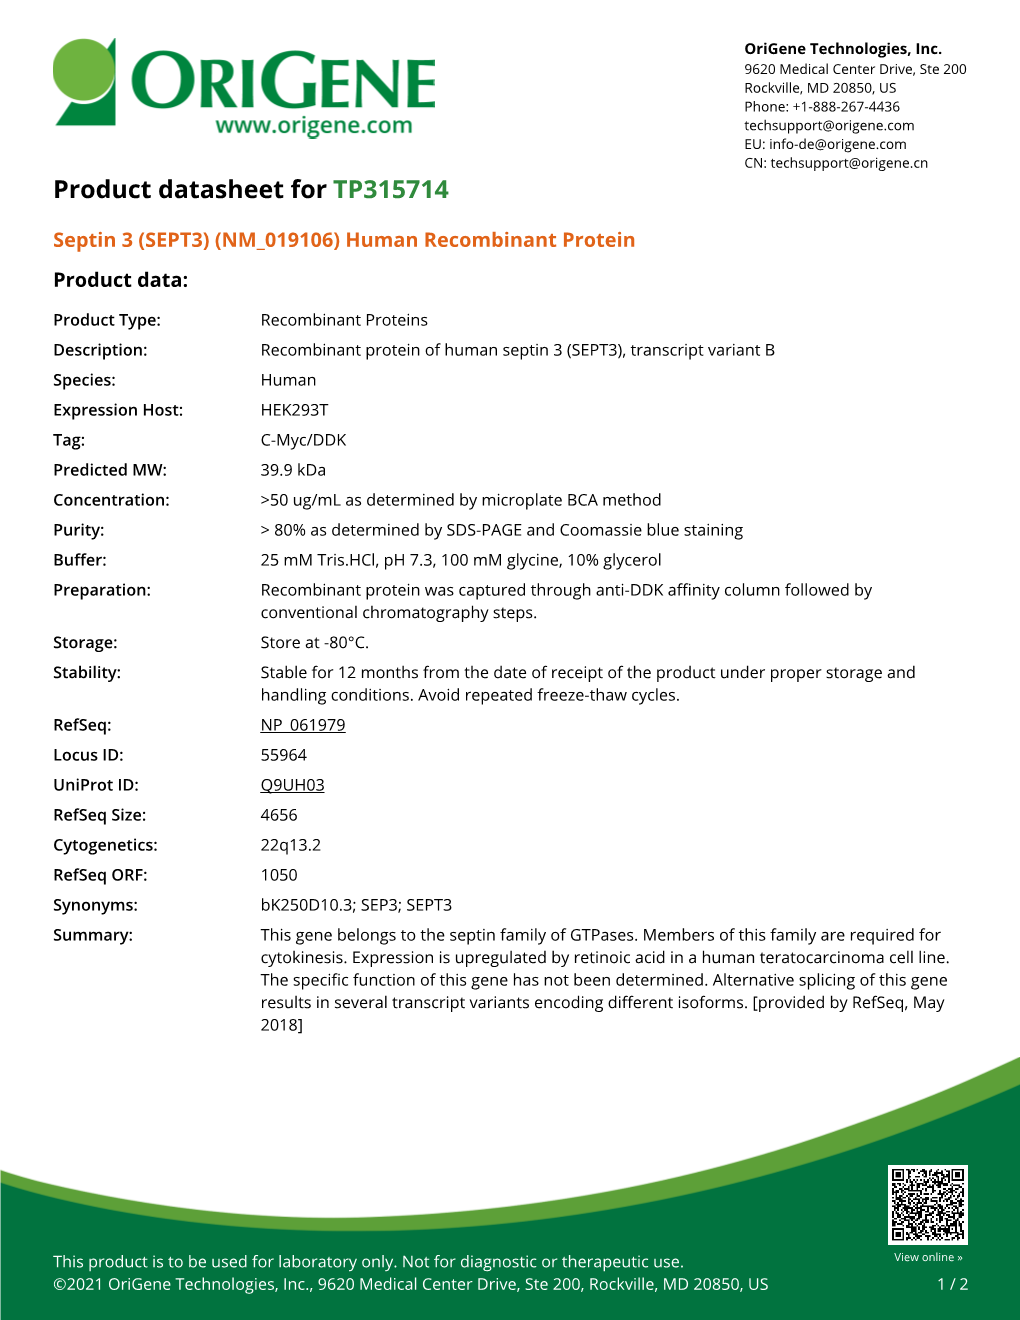 (SEPT3) (NM 019106) Human Recombinant Protein Product Data